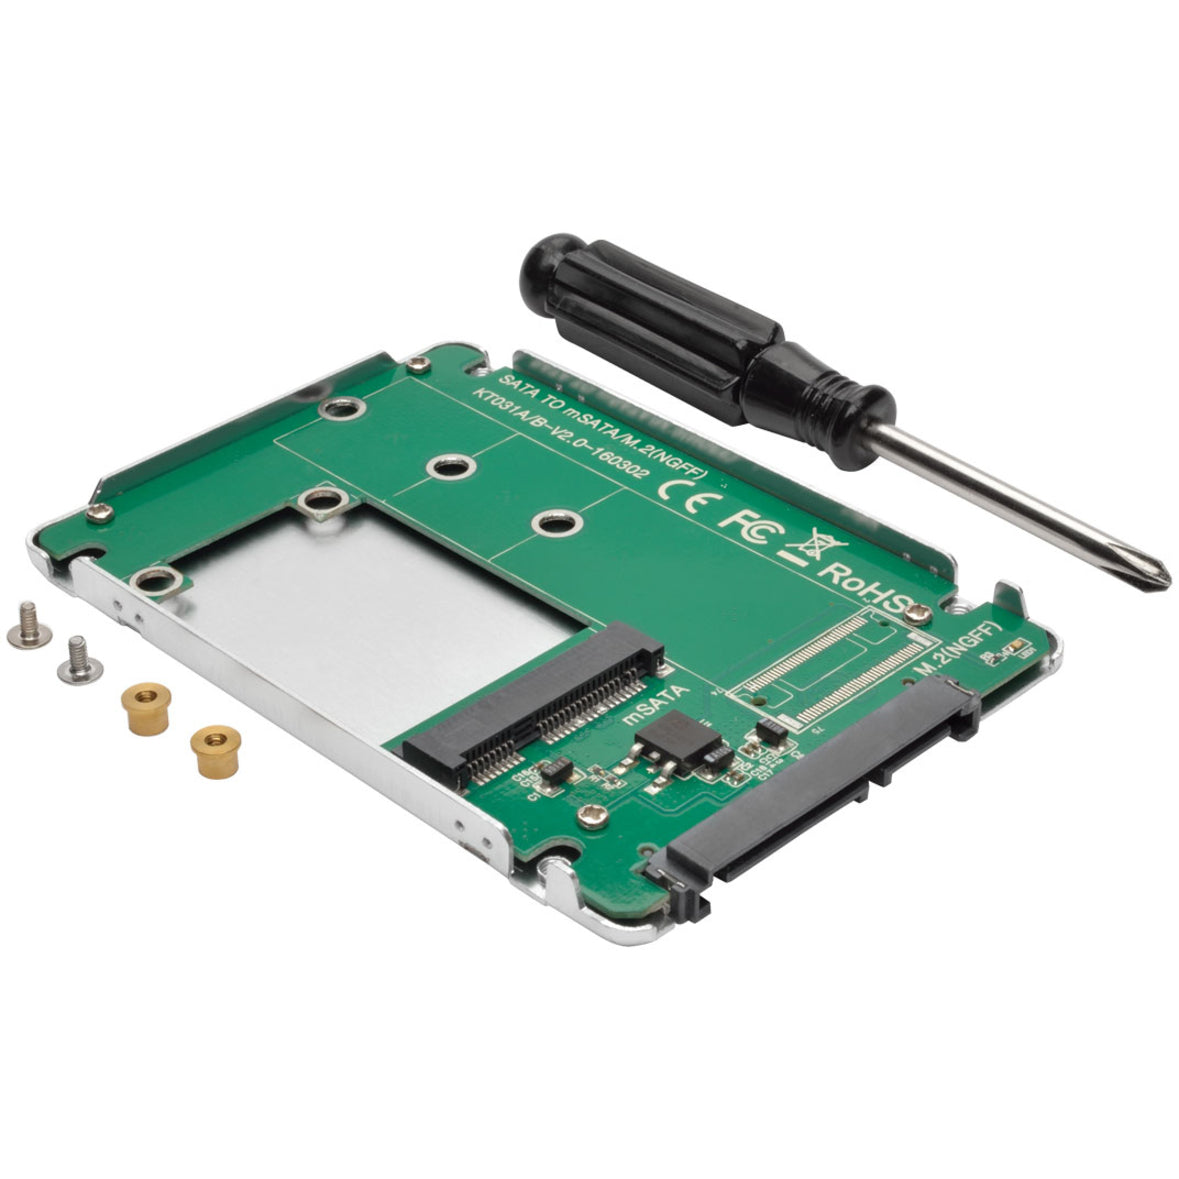 Tripp Lite P960-001-M2 M.2 NGFF SSD to 2.5 in. SATA Enclosure Adapter, Easy SSD Upgrade Solution